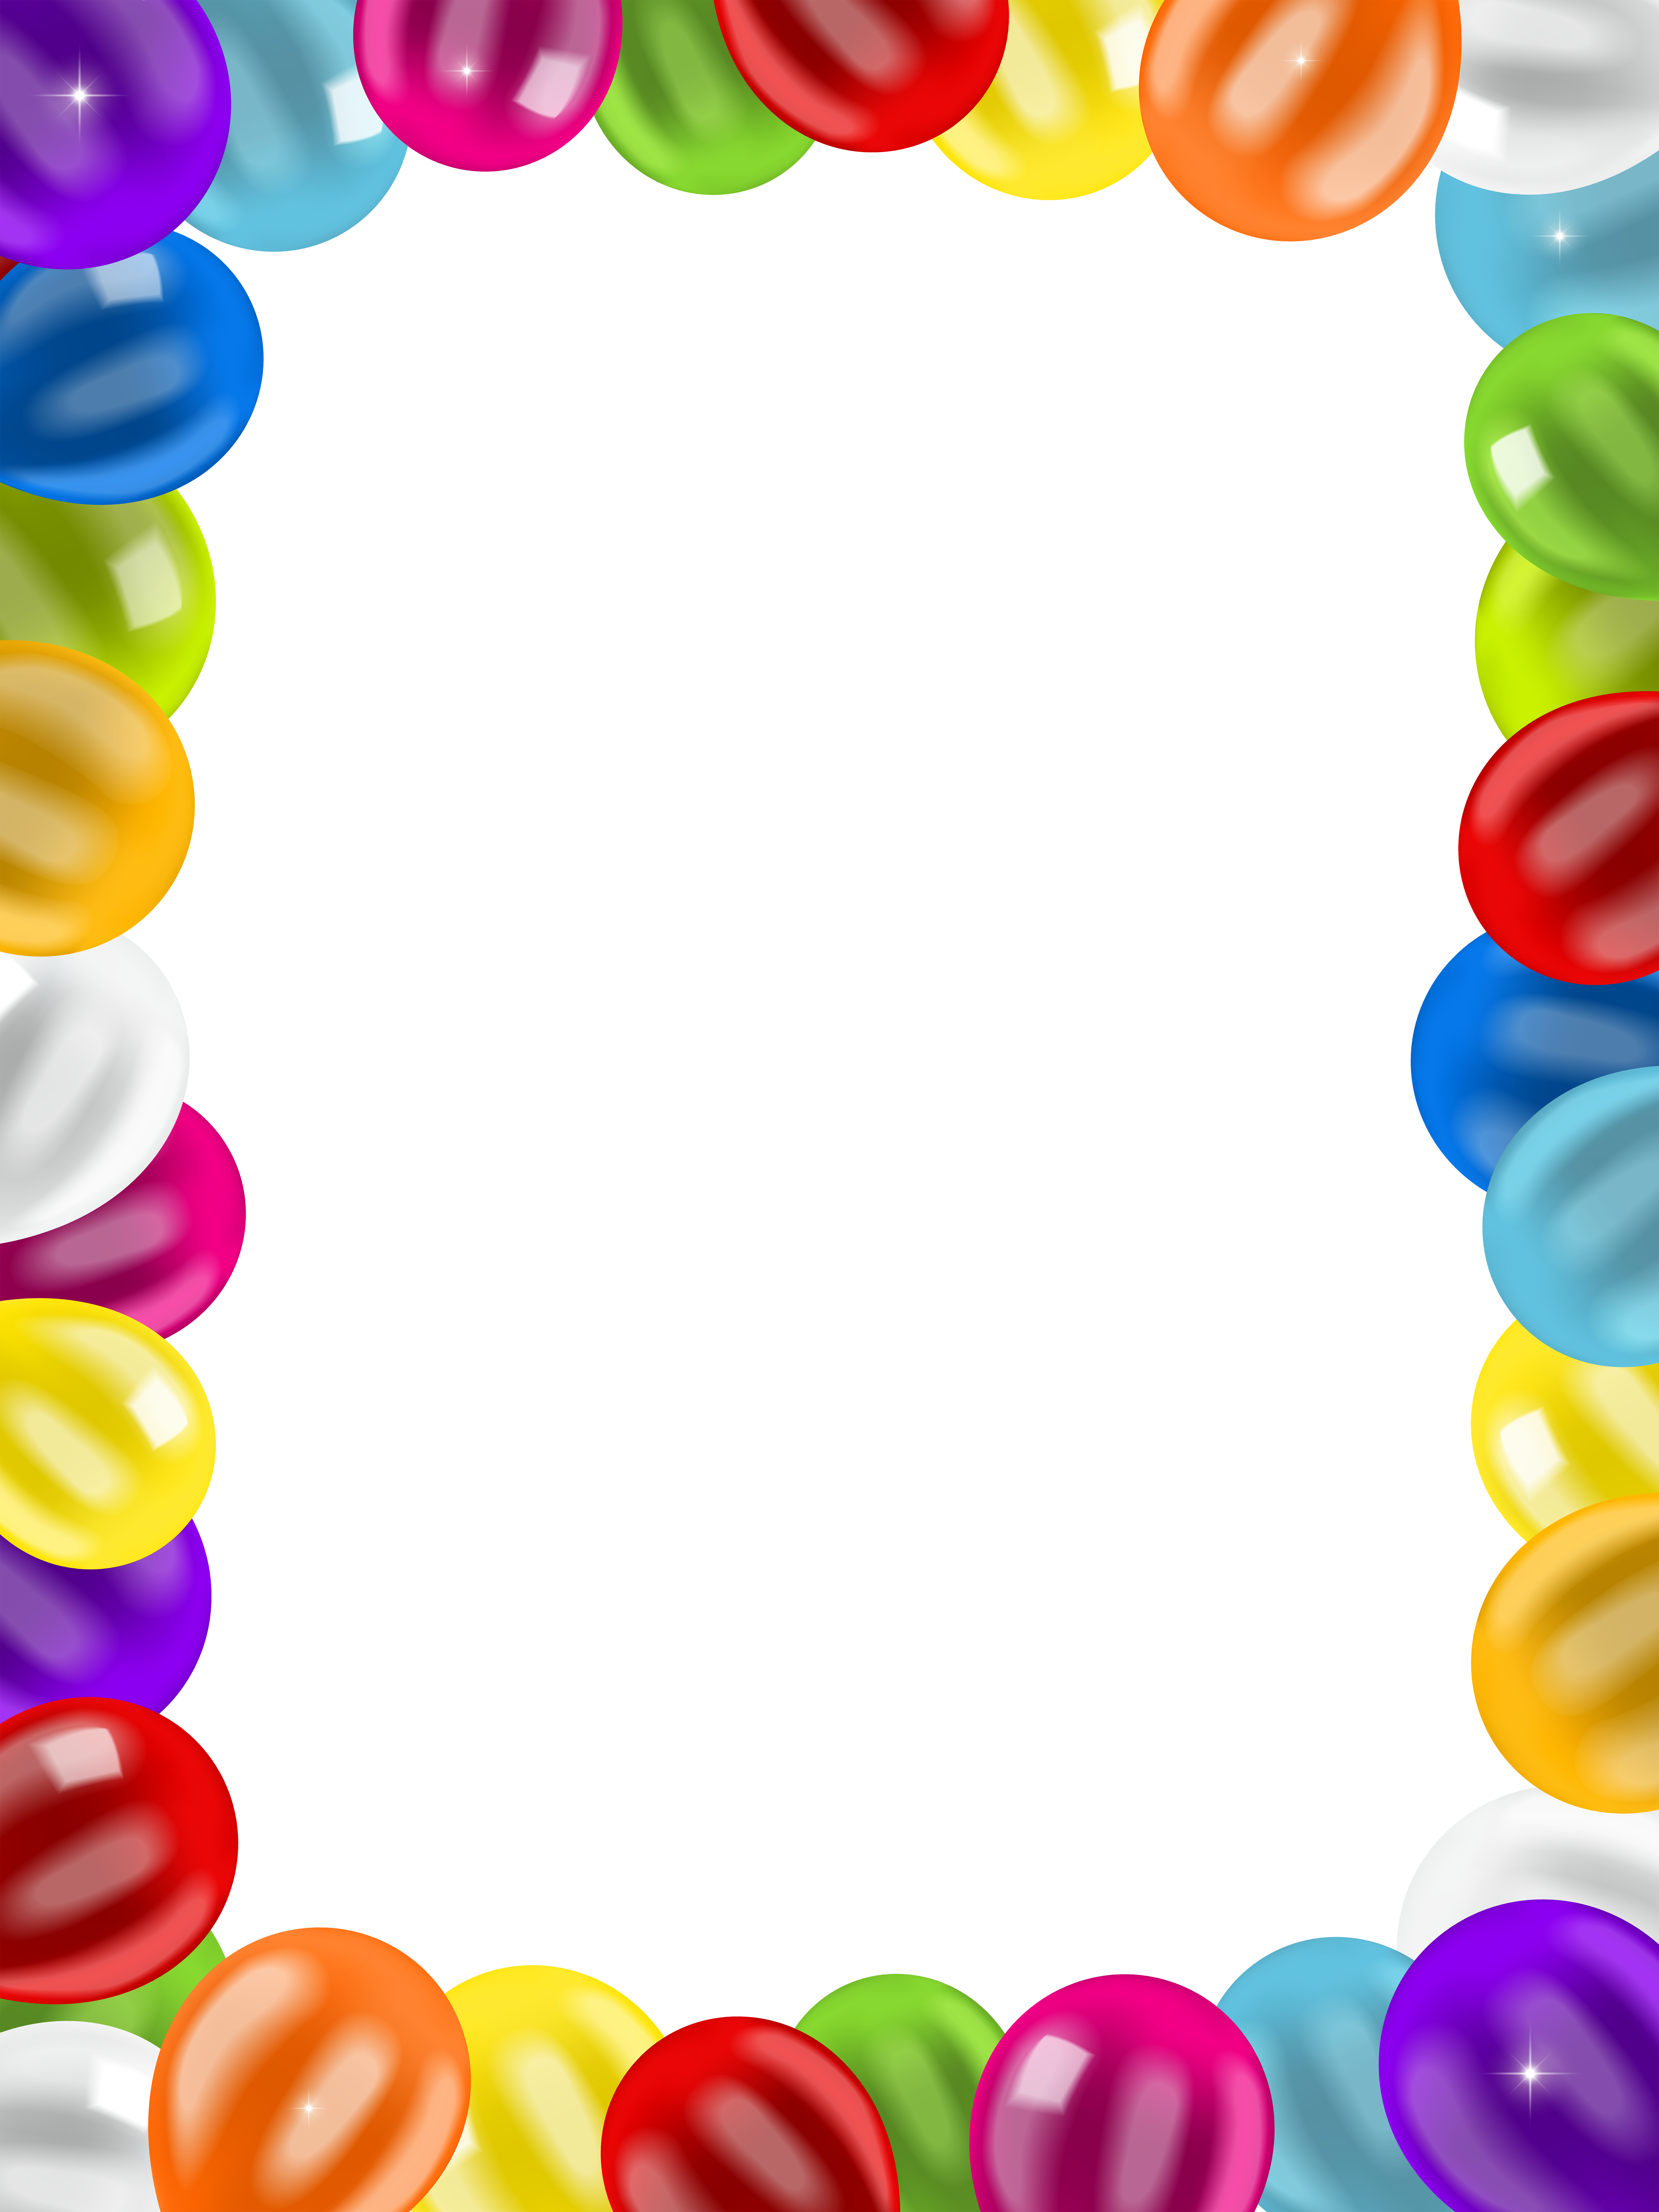 Balloon borders free page borders for word